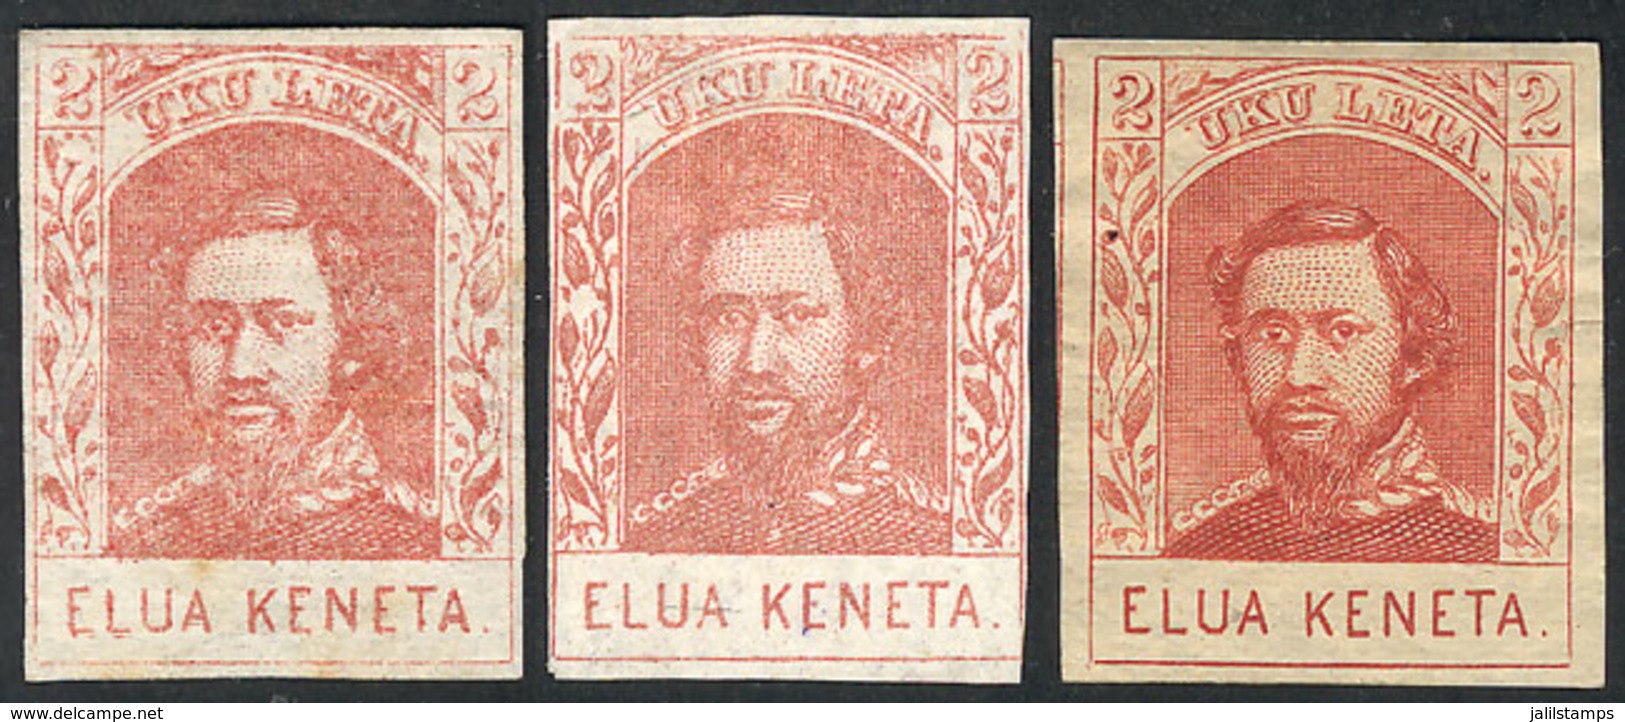 UNITED STATES - HAWAII: Sc.27 + 28 + 29, 1861/9 2c. Lithographed, On Vertically And Horiz Laid Paper + Engraved (printed - Hawaii